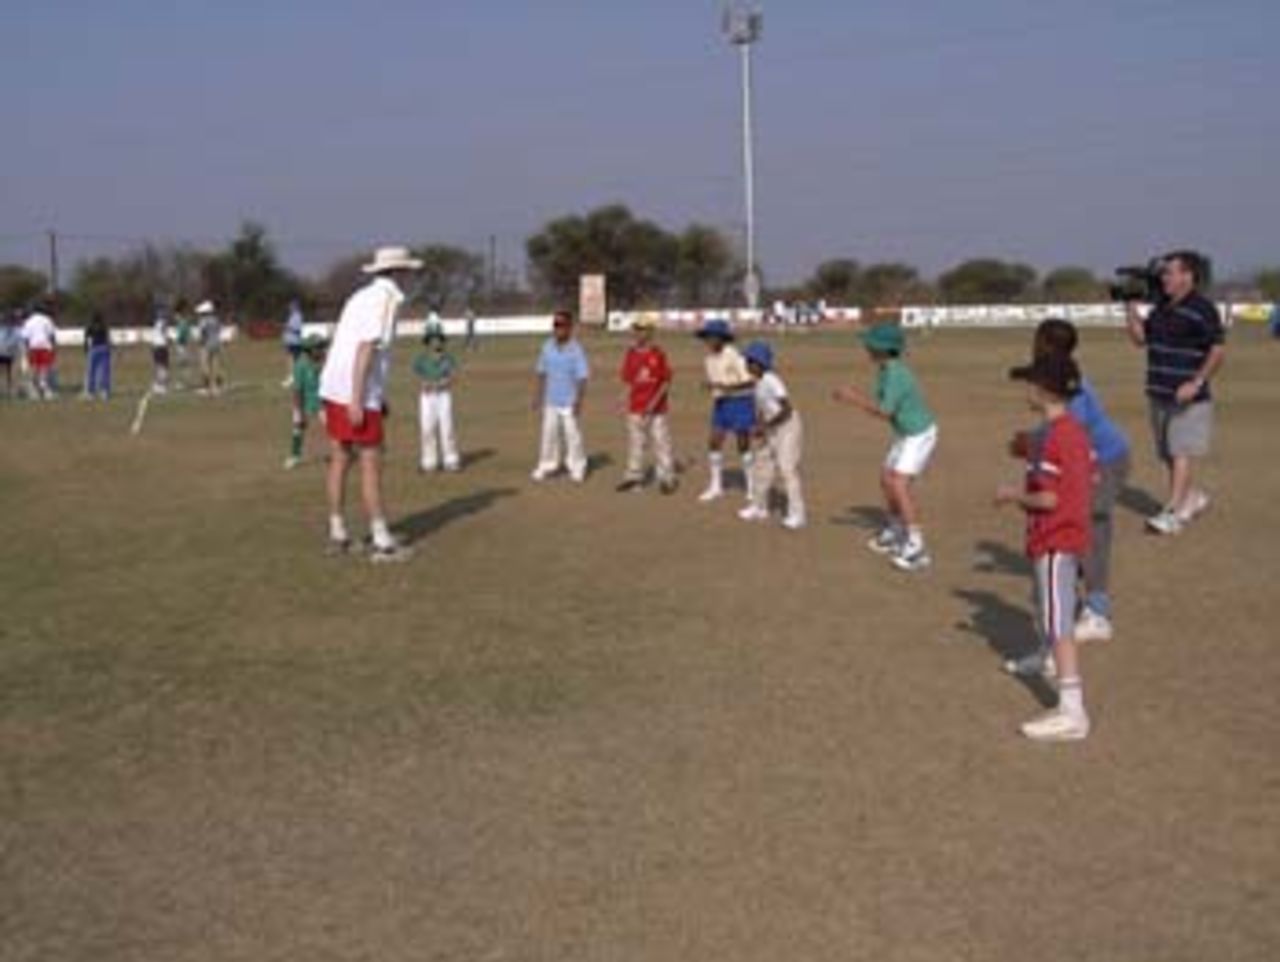 Local Junior players being coached by the Gauteng Lions